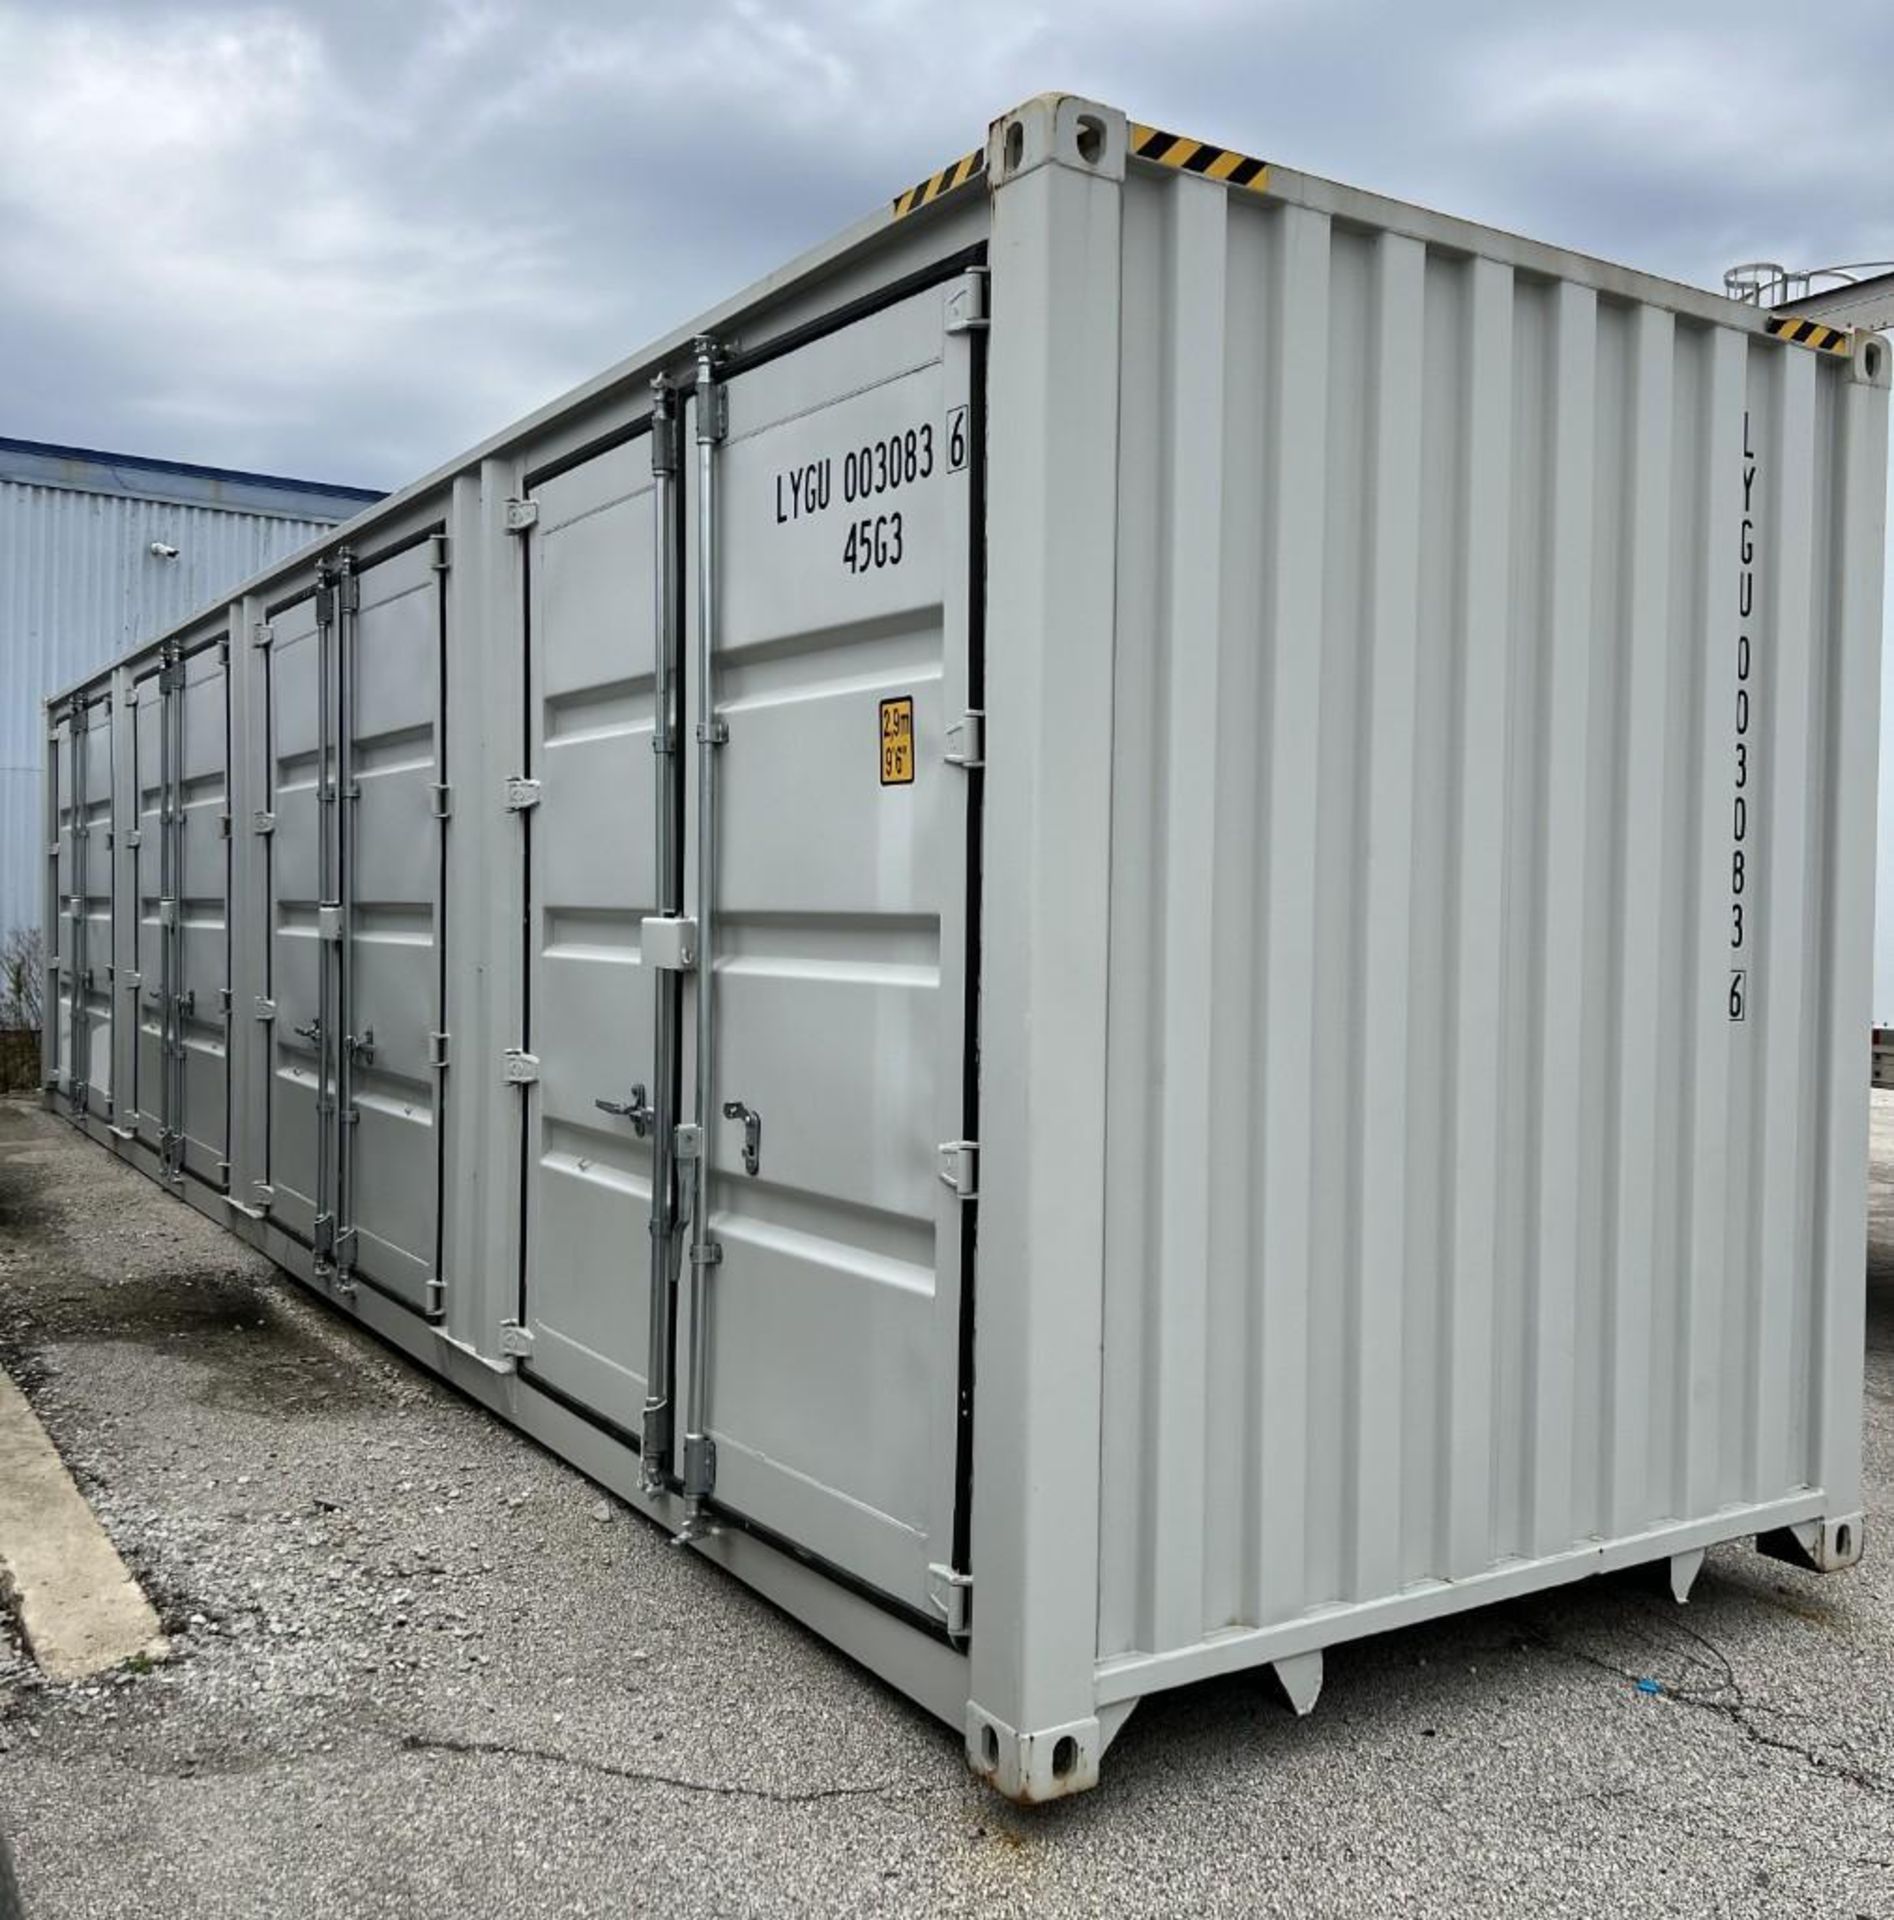 Suihe Type M45G3QC 40' High Cube Open-Sided Storage Container. Serial# DFOC003543, Built 06/2021. - Image 5 of 11